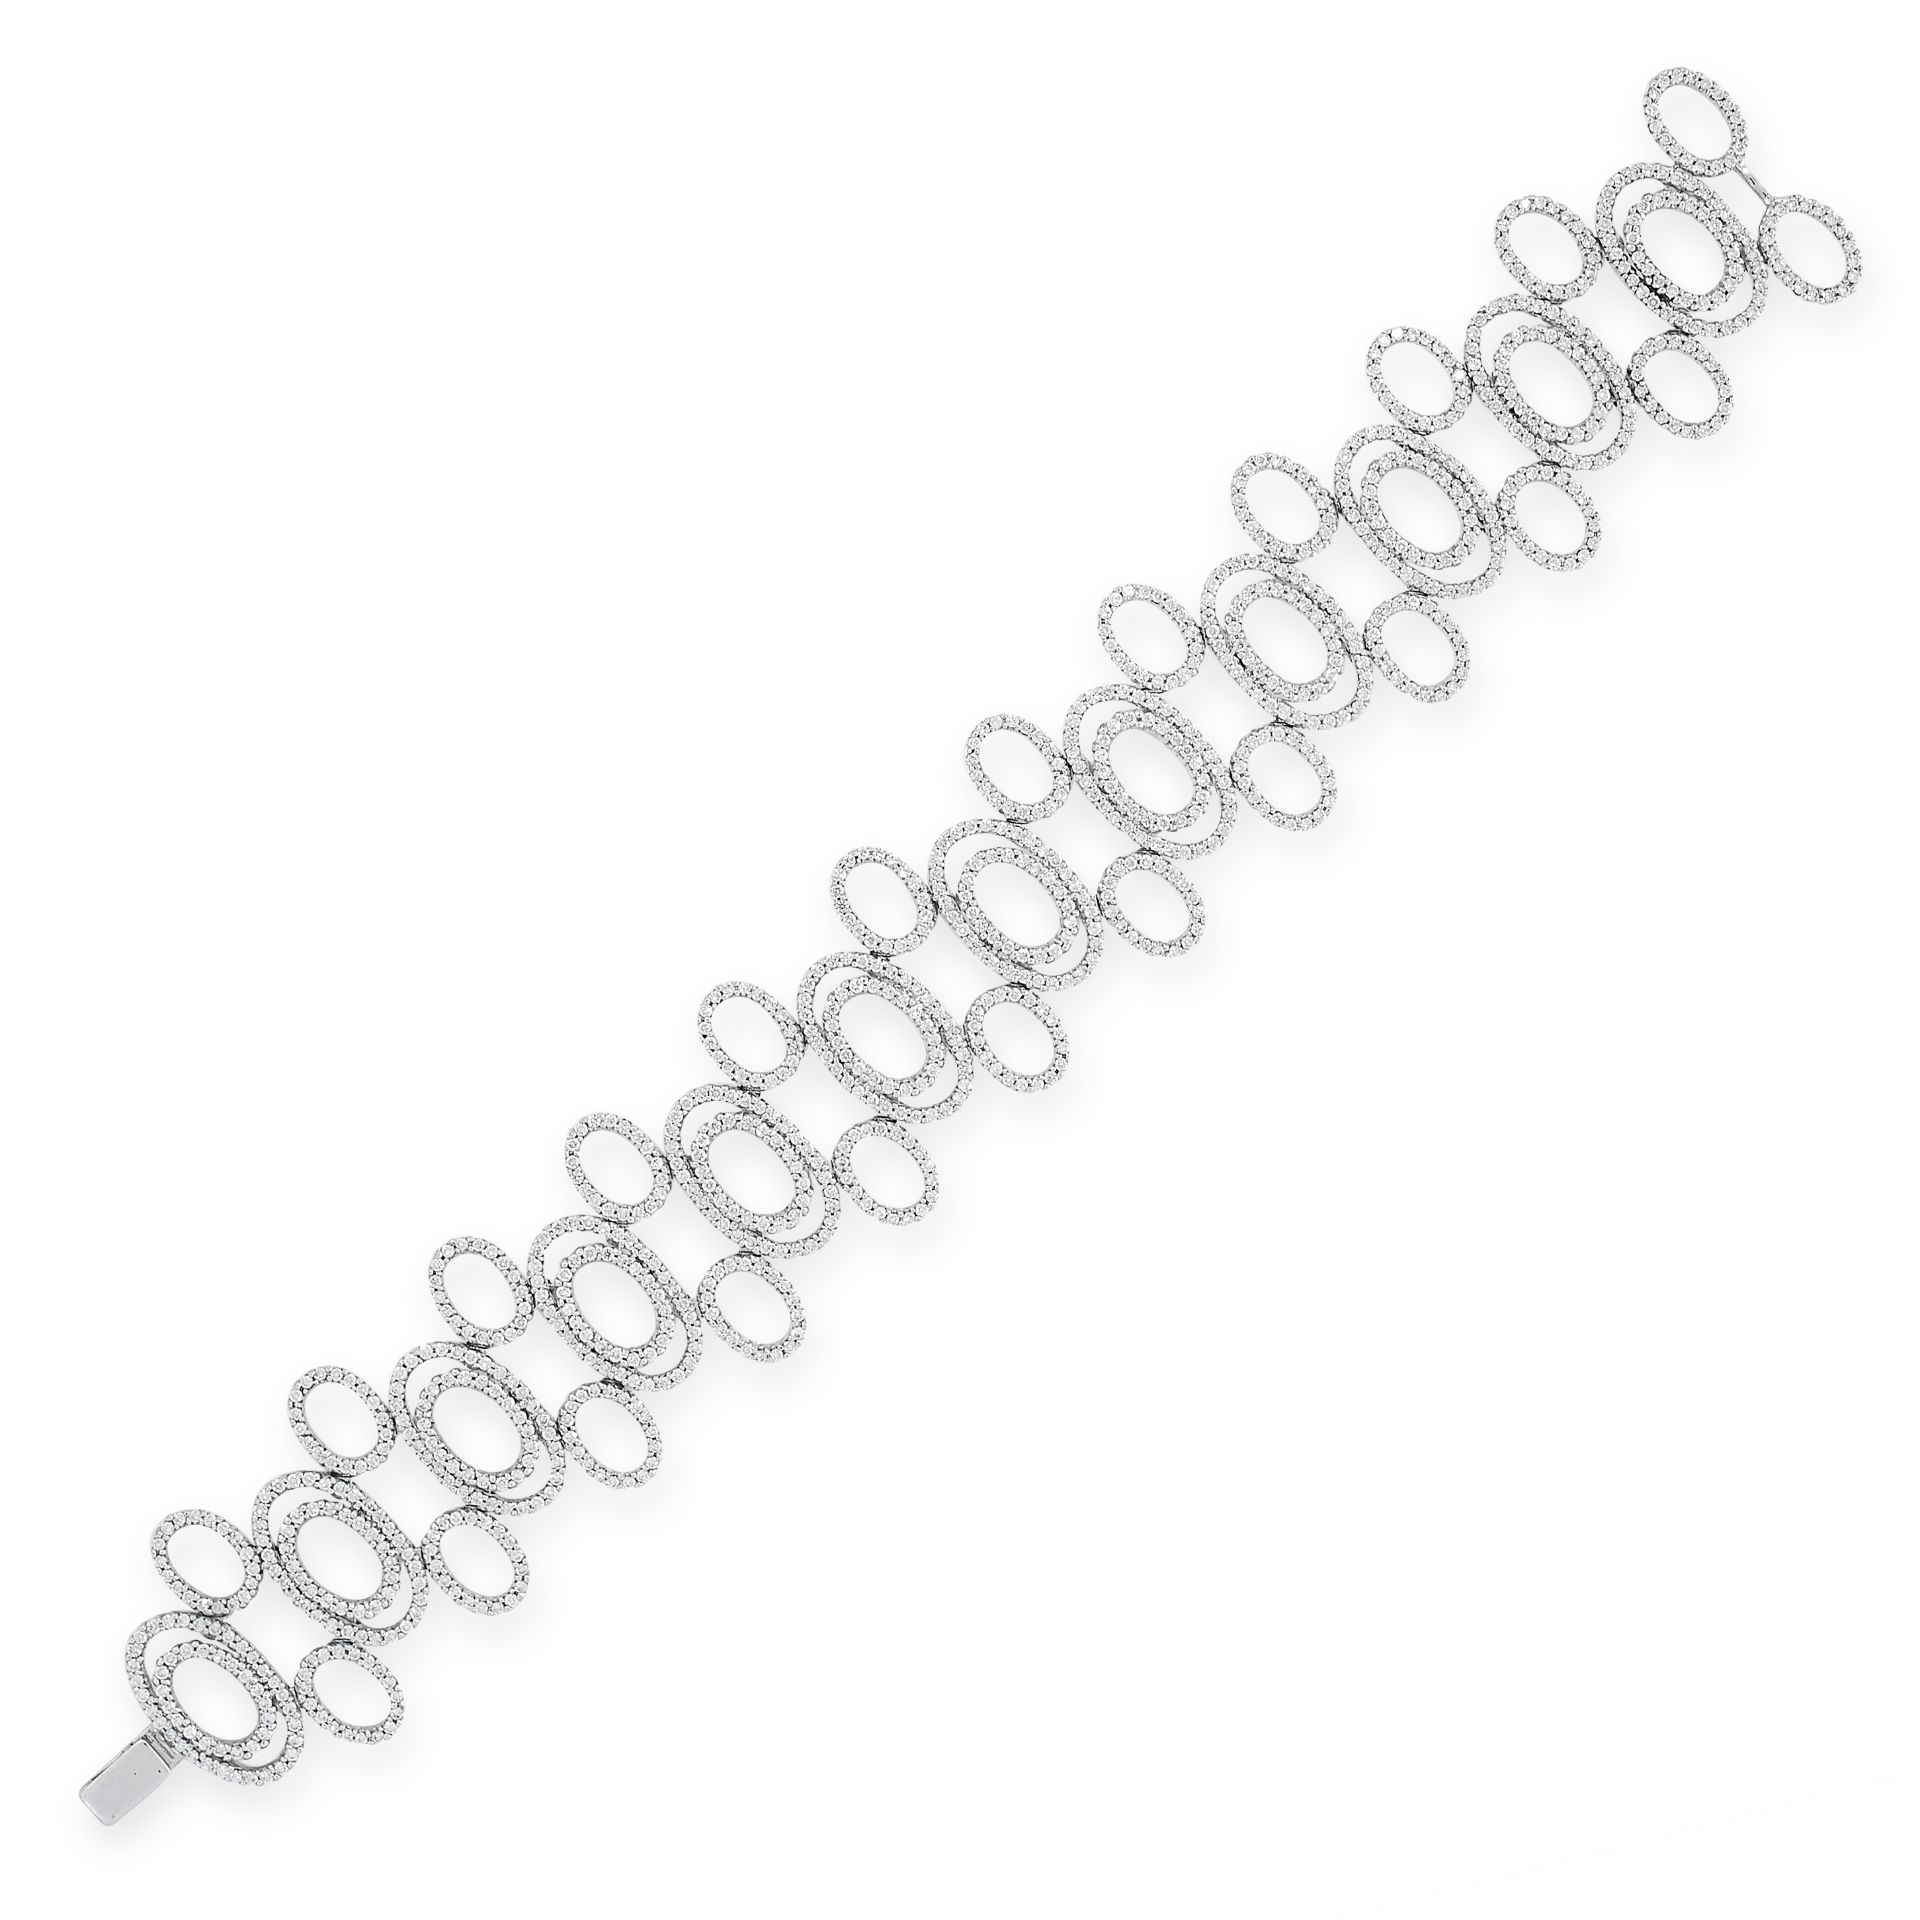 A DIAMOND FANCY LINK BRACELET in 18ct white gold, formed of a series of articulated oval links,